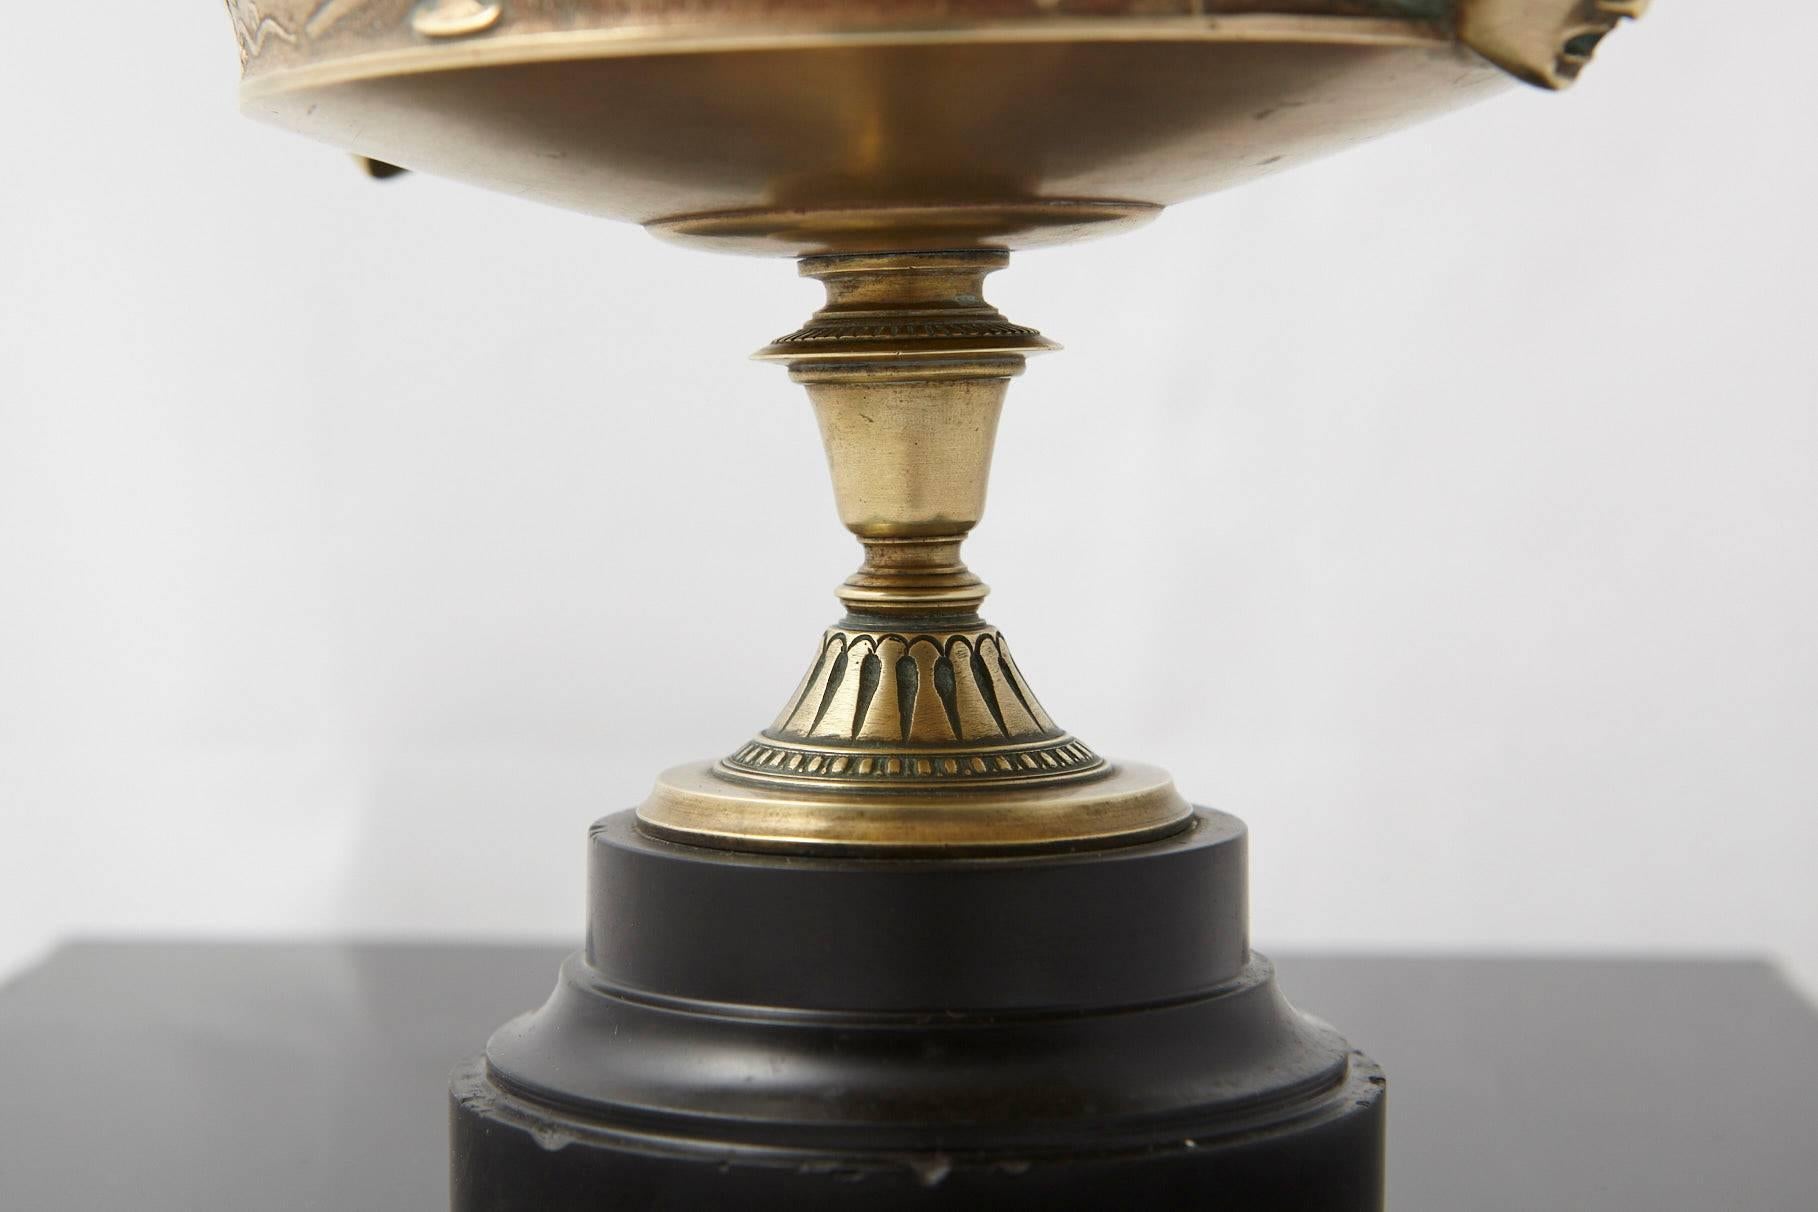 Late 19th Century 19th Century Aesthetic Movement Brass Bowl on Marble Base